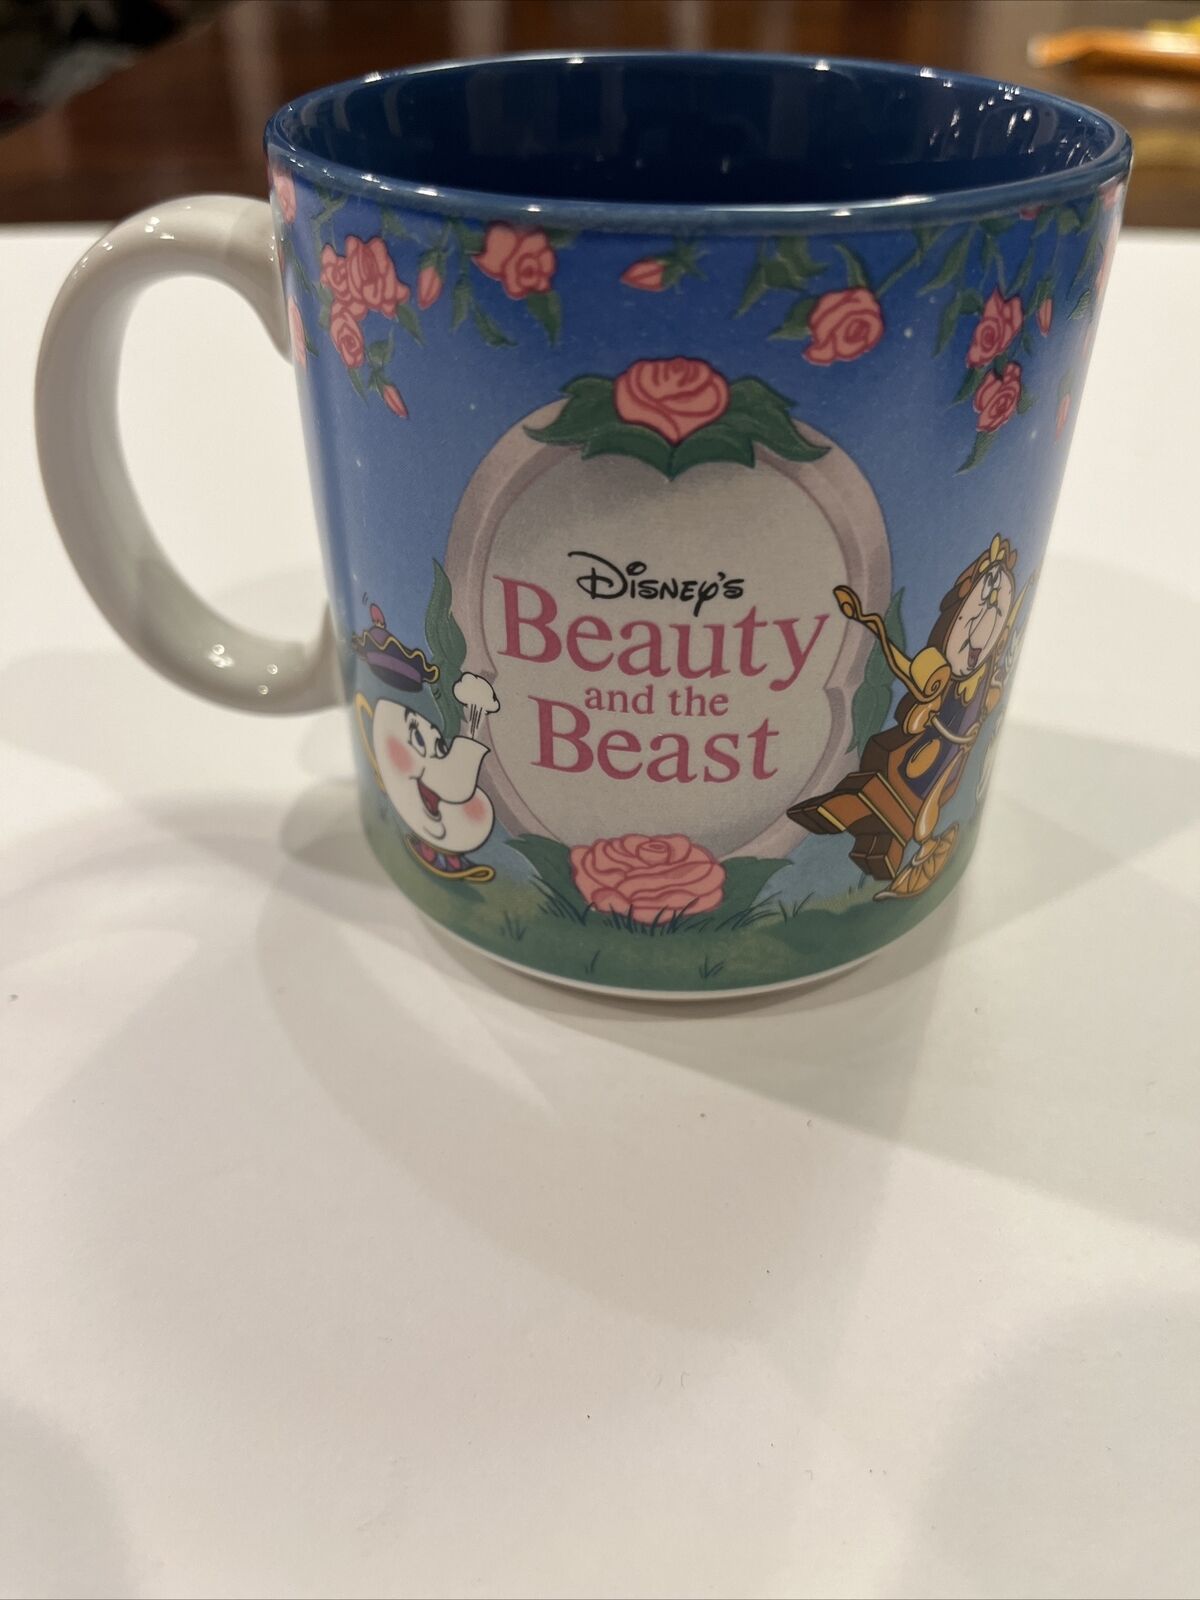 Vintage Disney's Beauty and the Beast Coffee Mug Cup For Collectors